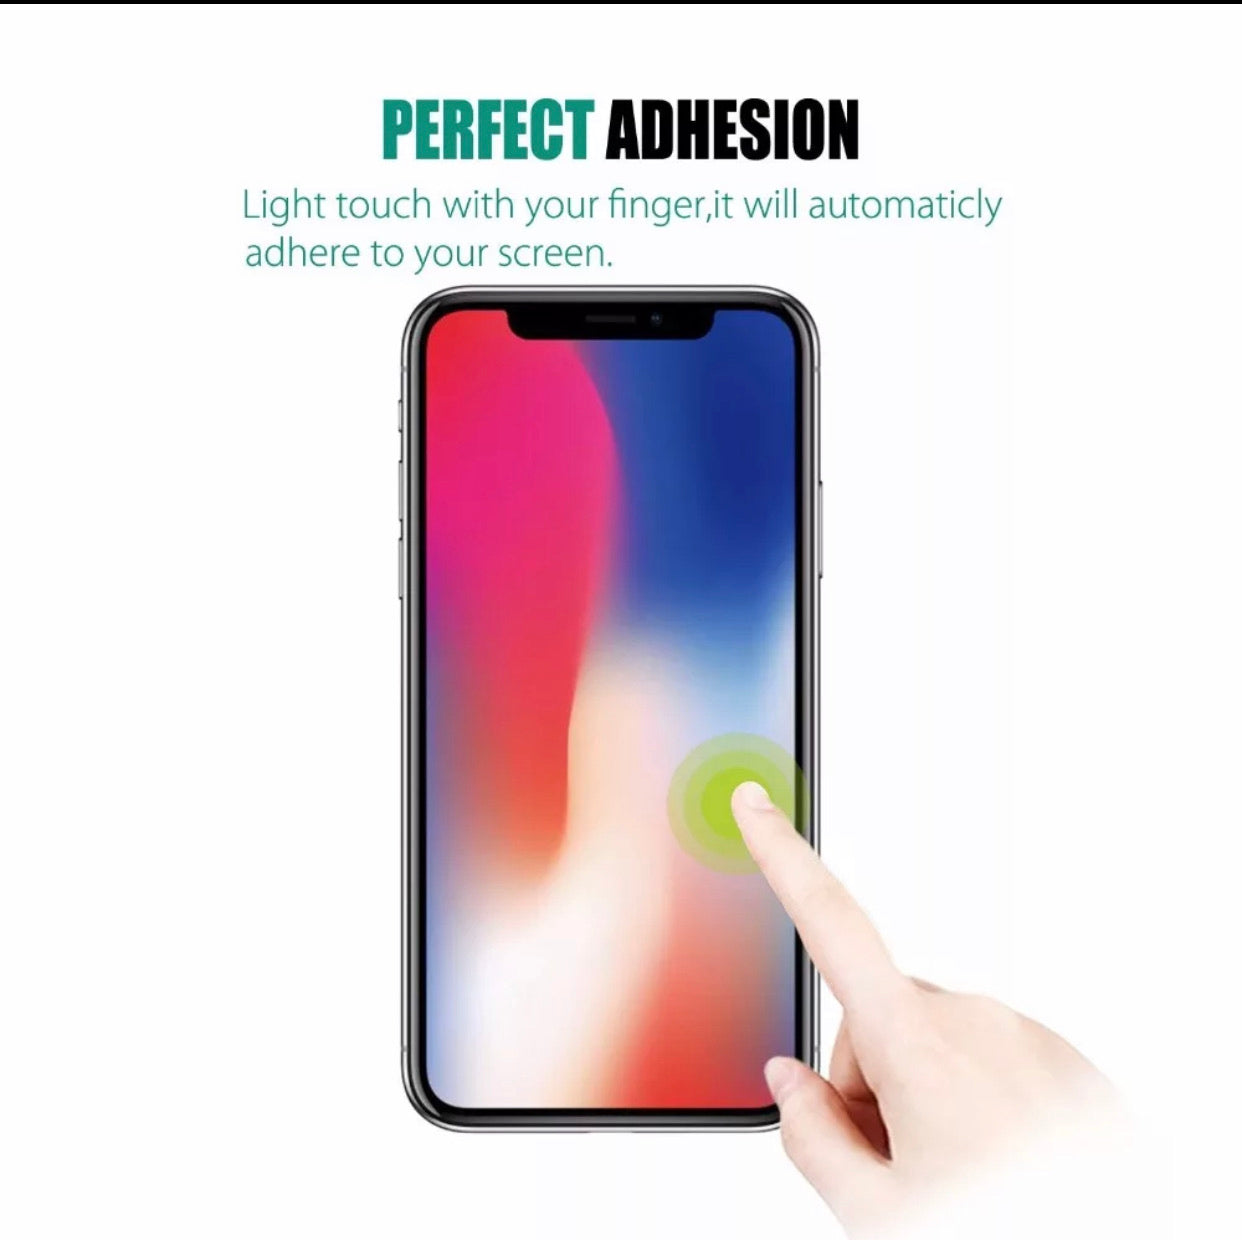 2 pk Unipha 9H Tempered Glass Screen Protector 2.5D for Iphone 11 Pro X / XS Max